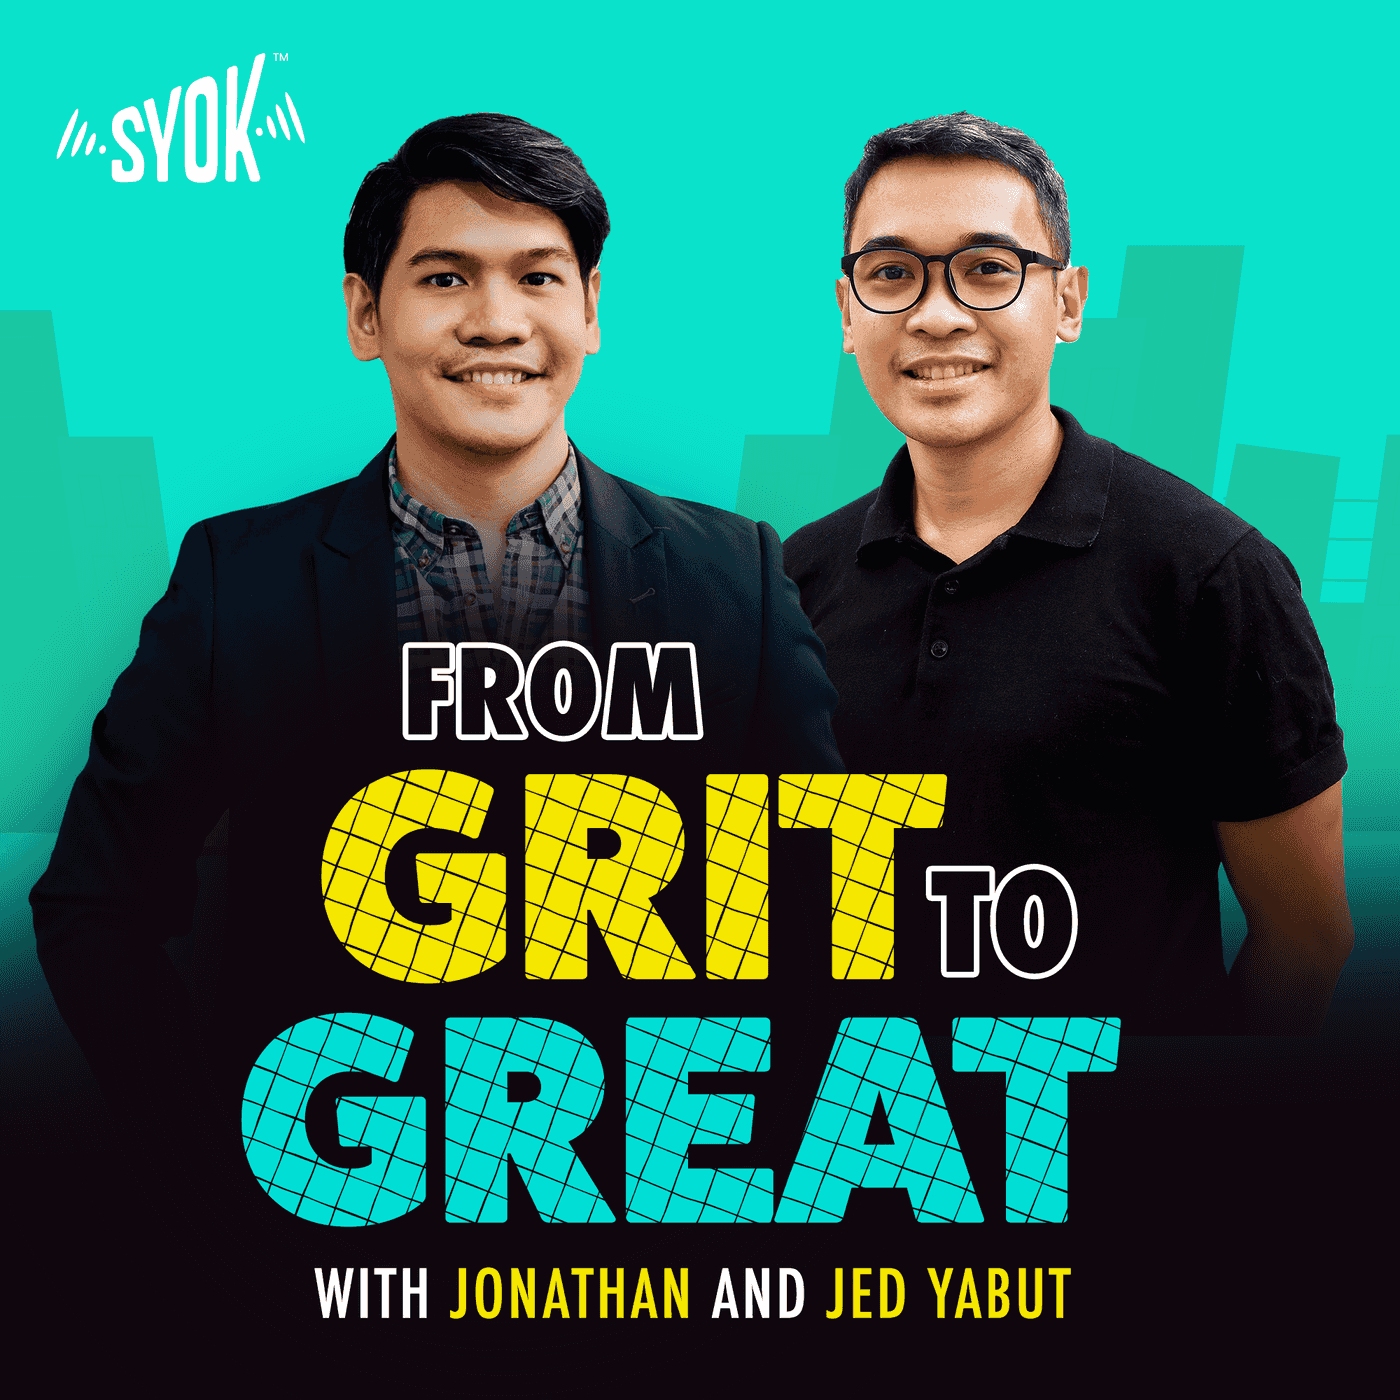 From Grit To Great with Jonathan and Jed Yabut - SYOK Podcast [ENG]